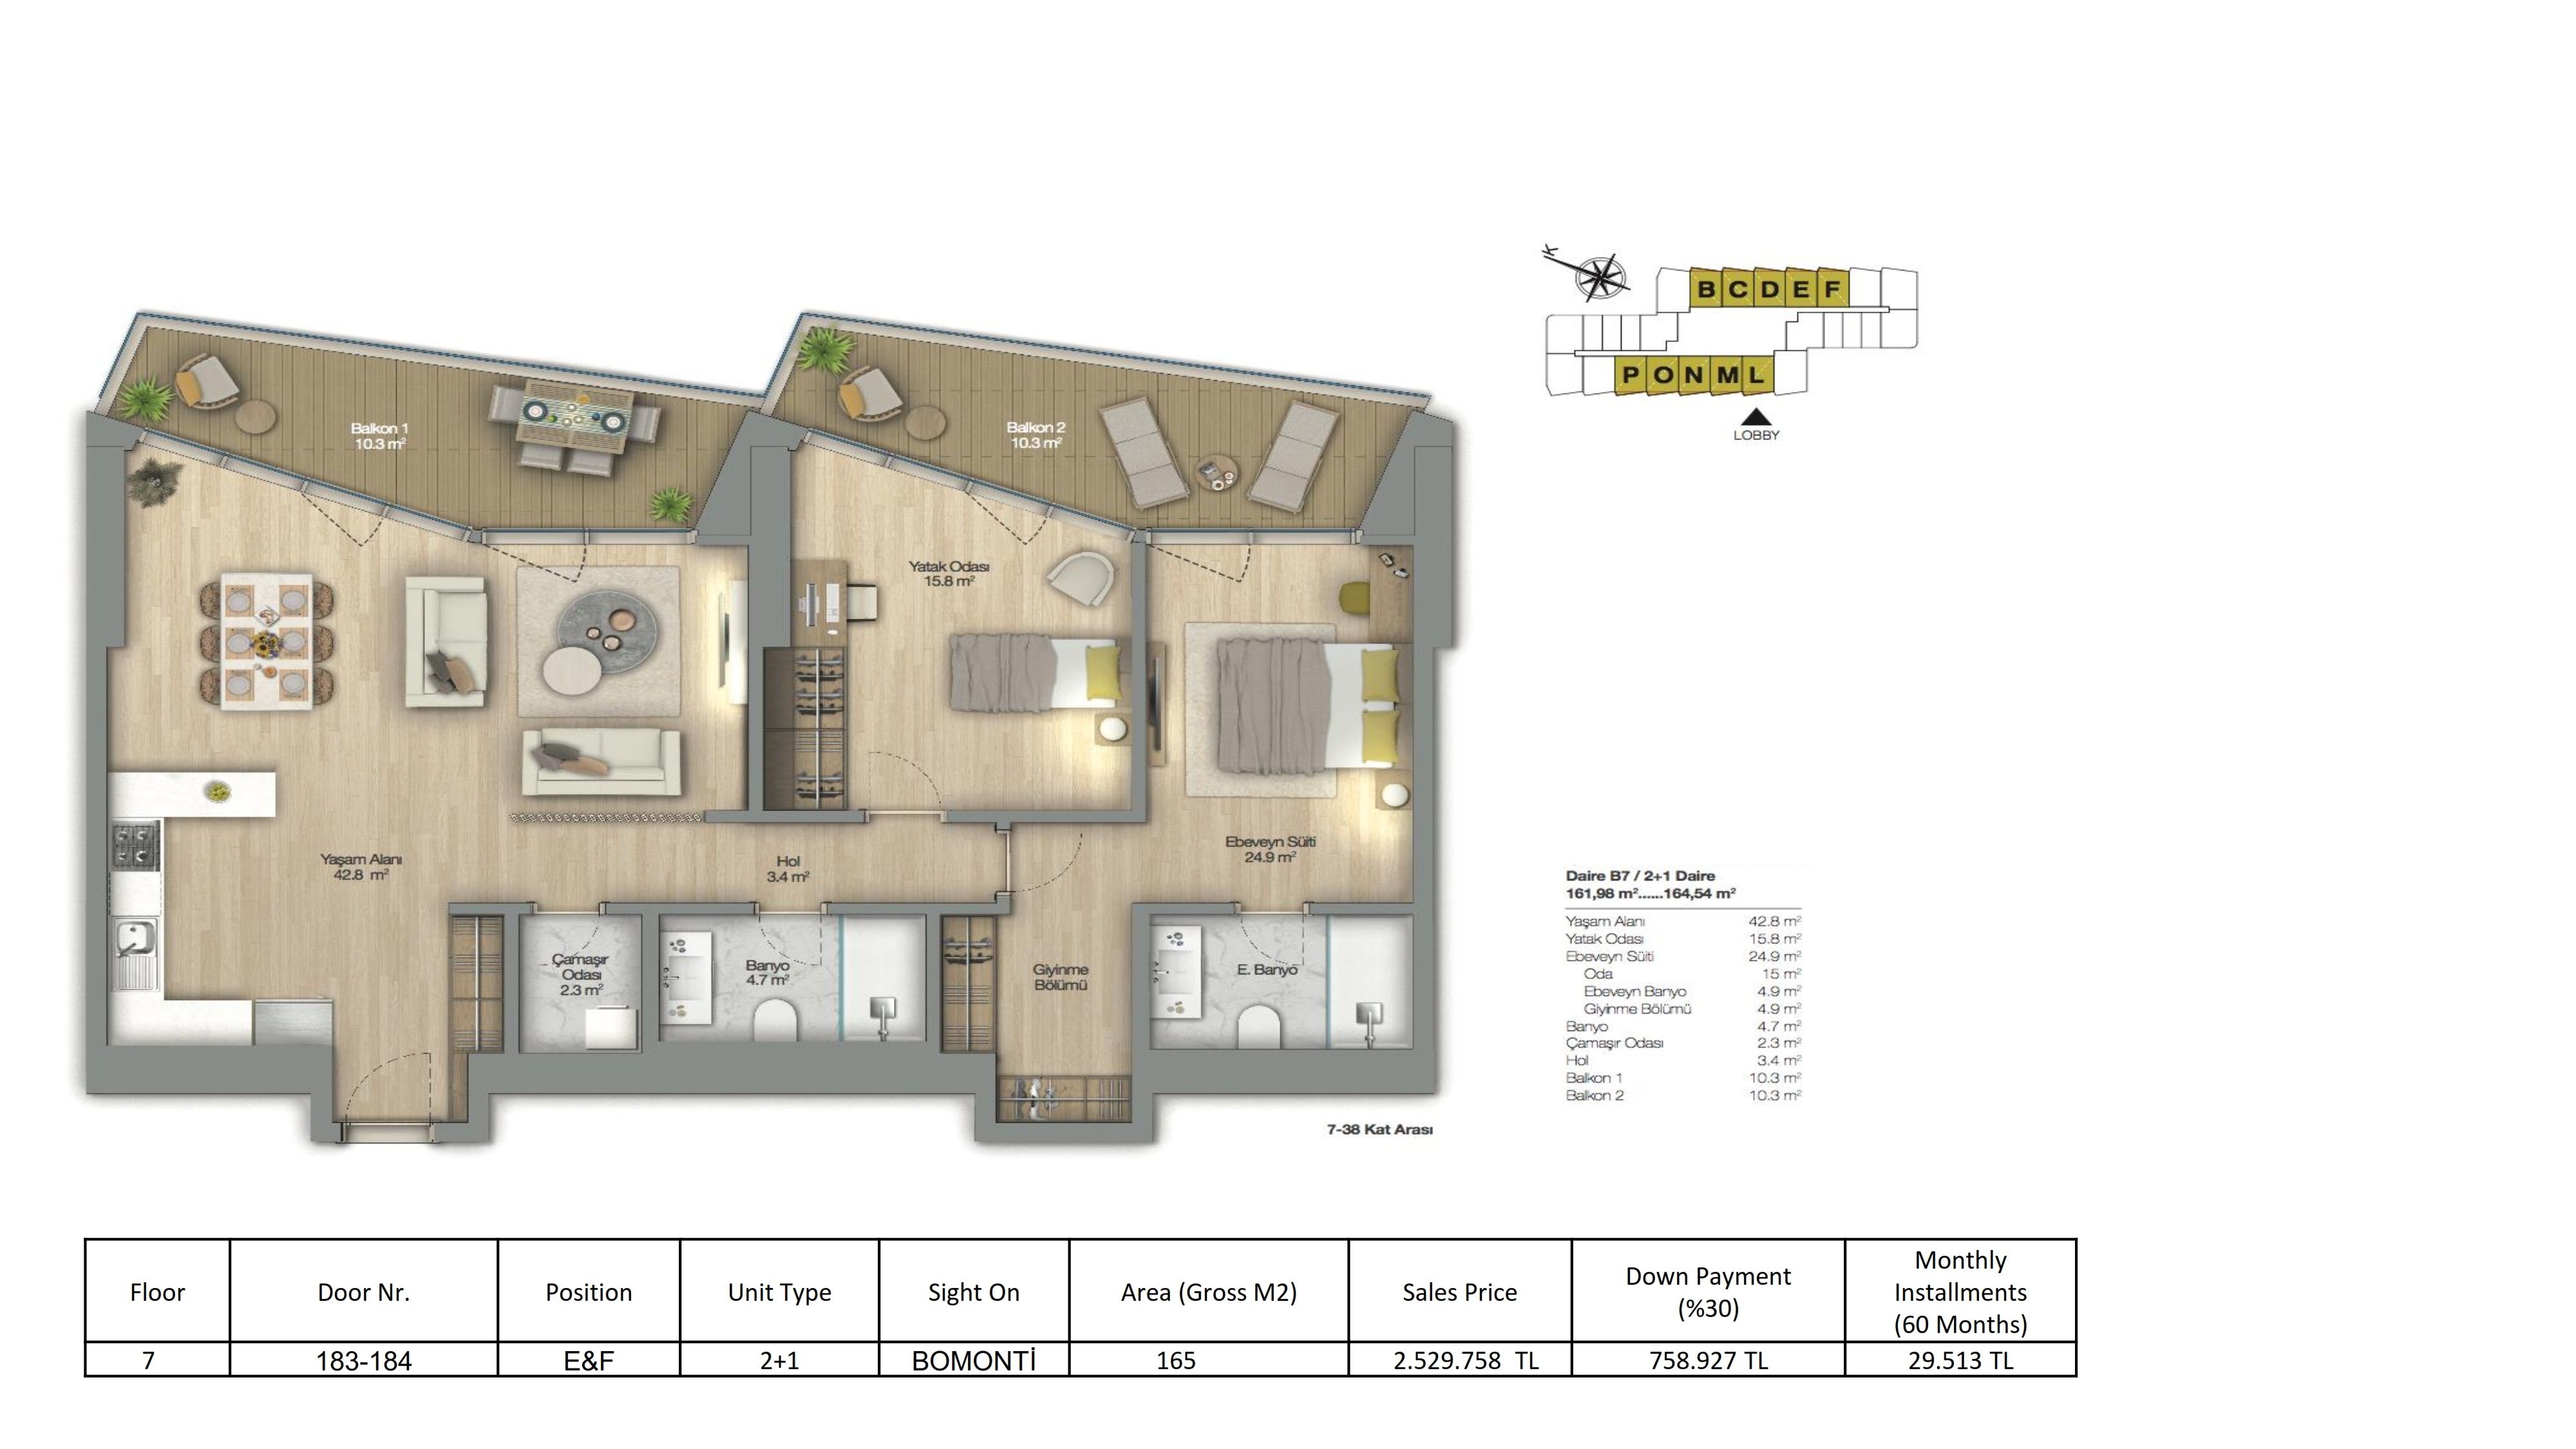 Two-Bedrooms plan